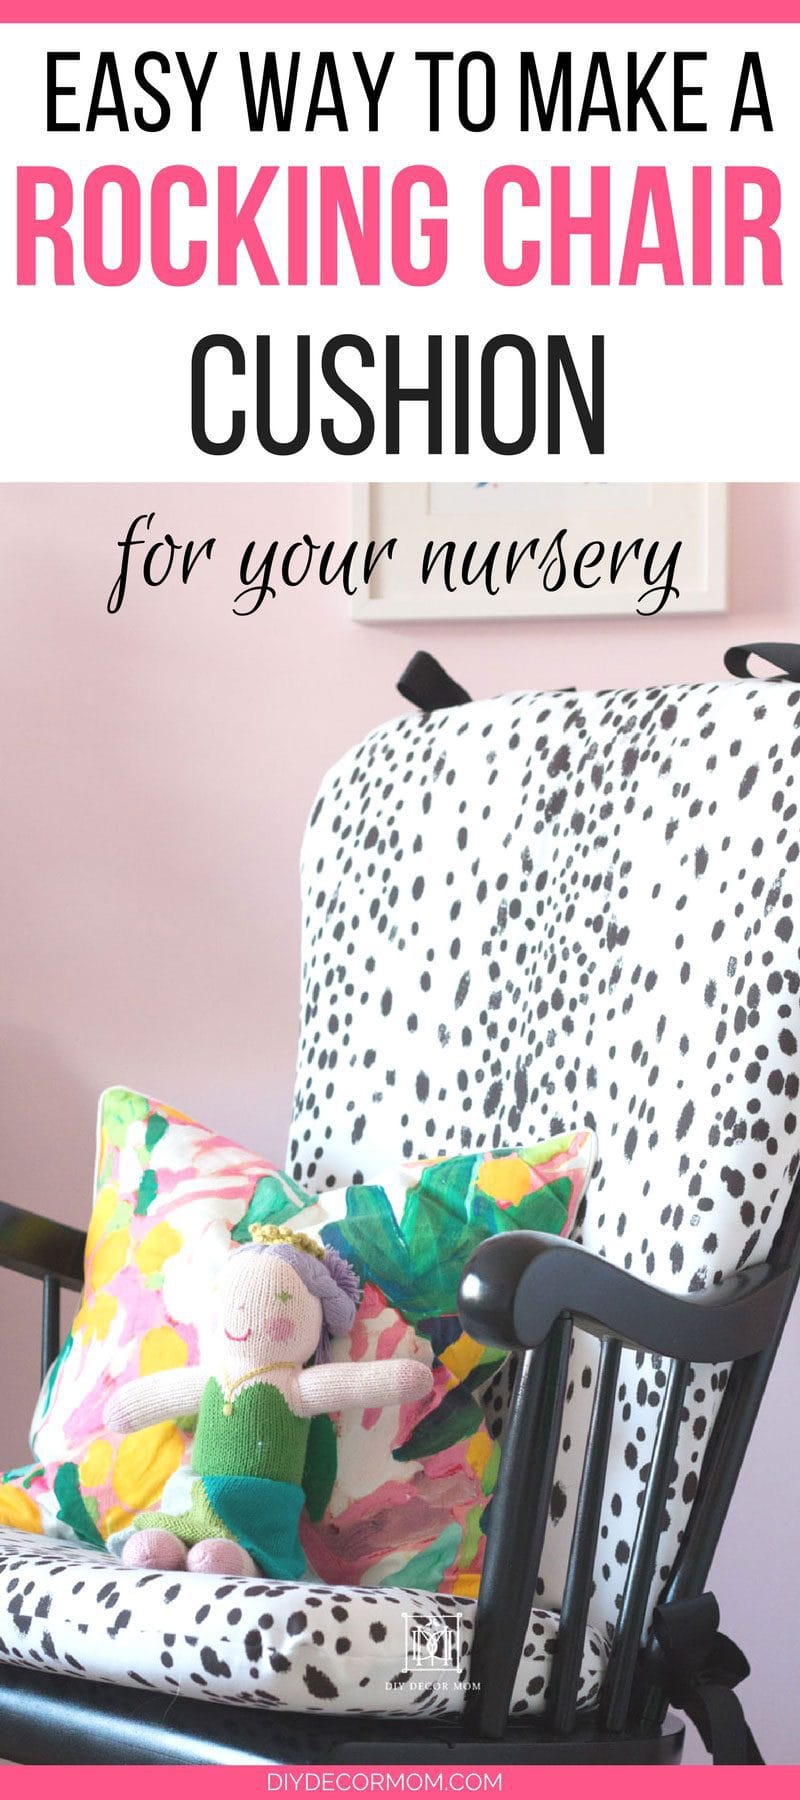 How To Make A Rocking Chair Cushion For Your Nursery See How To Diy An Upholstered Ro Rocking Chair Cushions Upholstered Rocking Chairs Painted Rocking Chairs